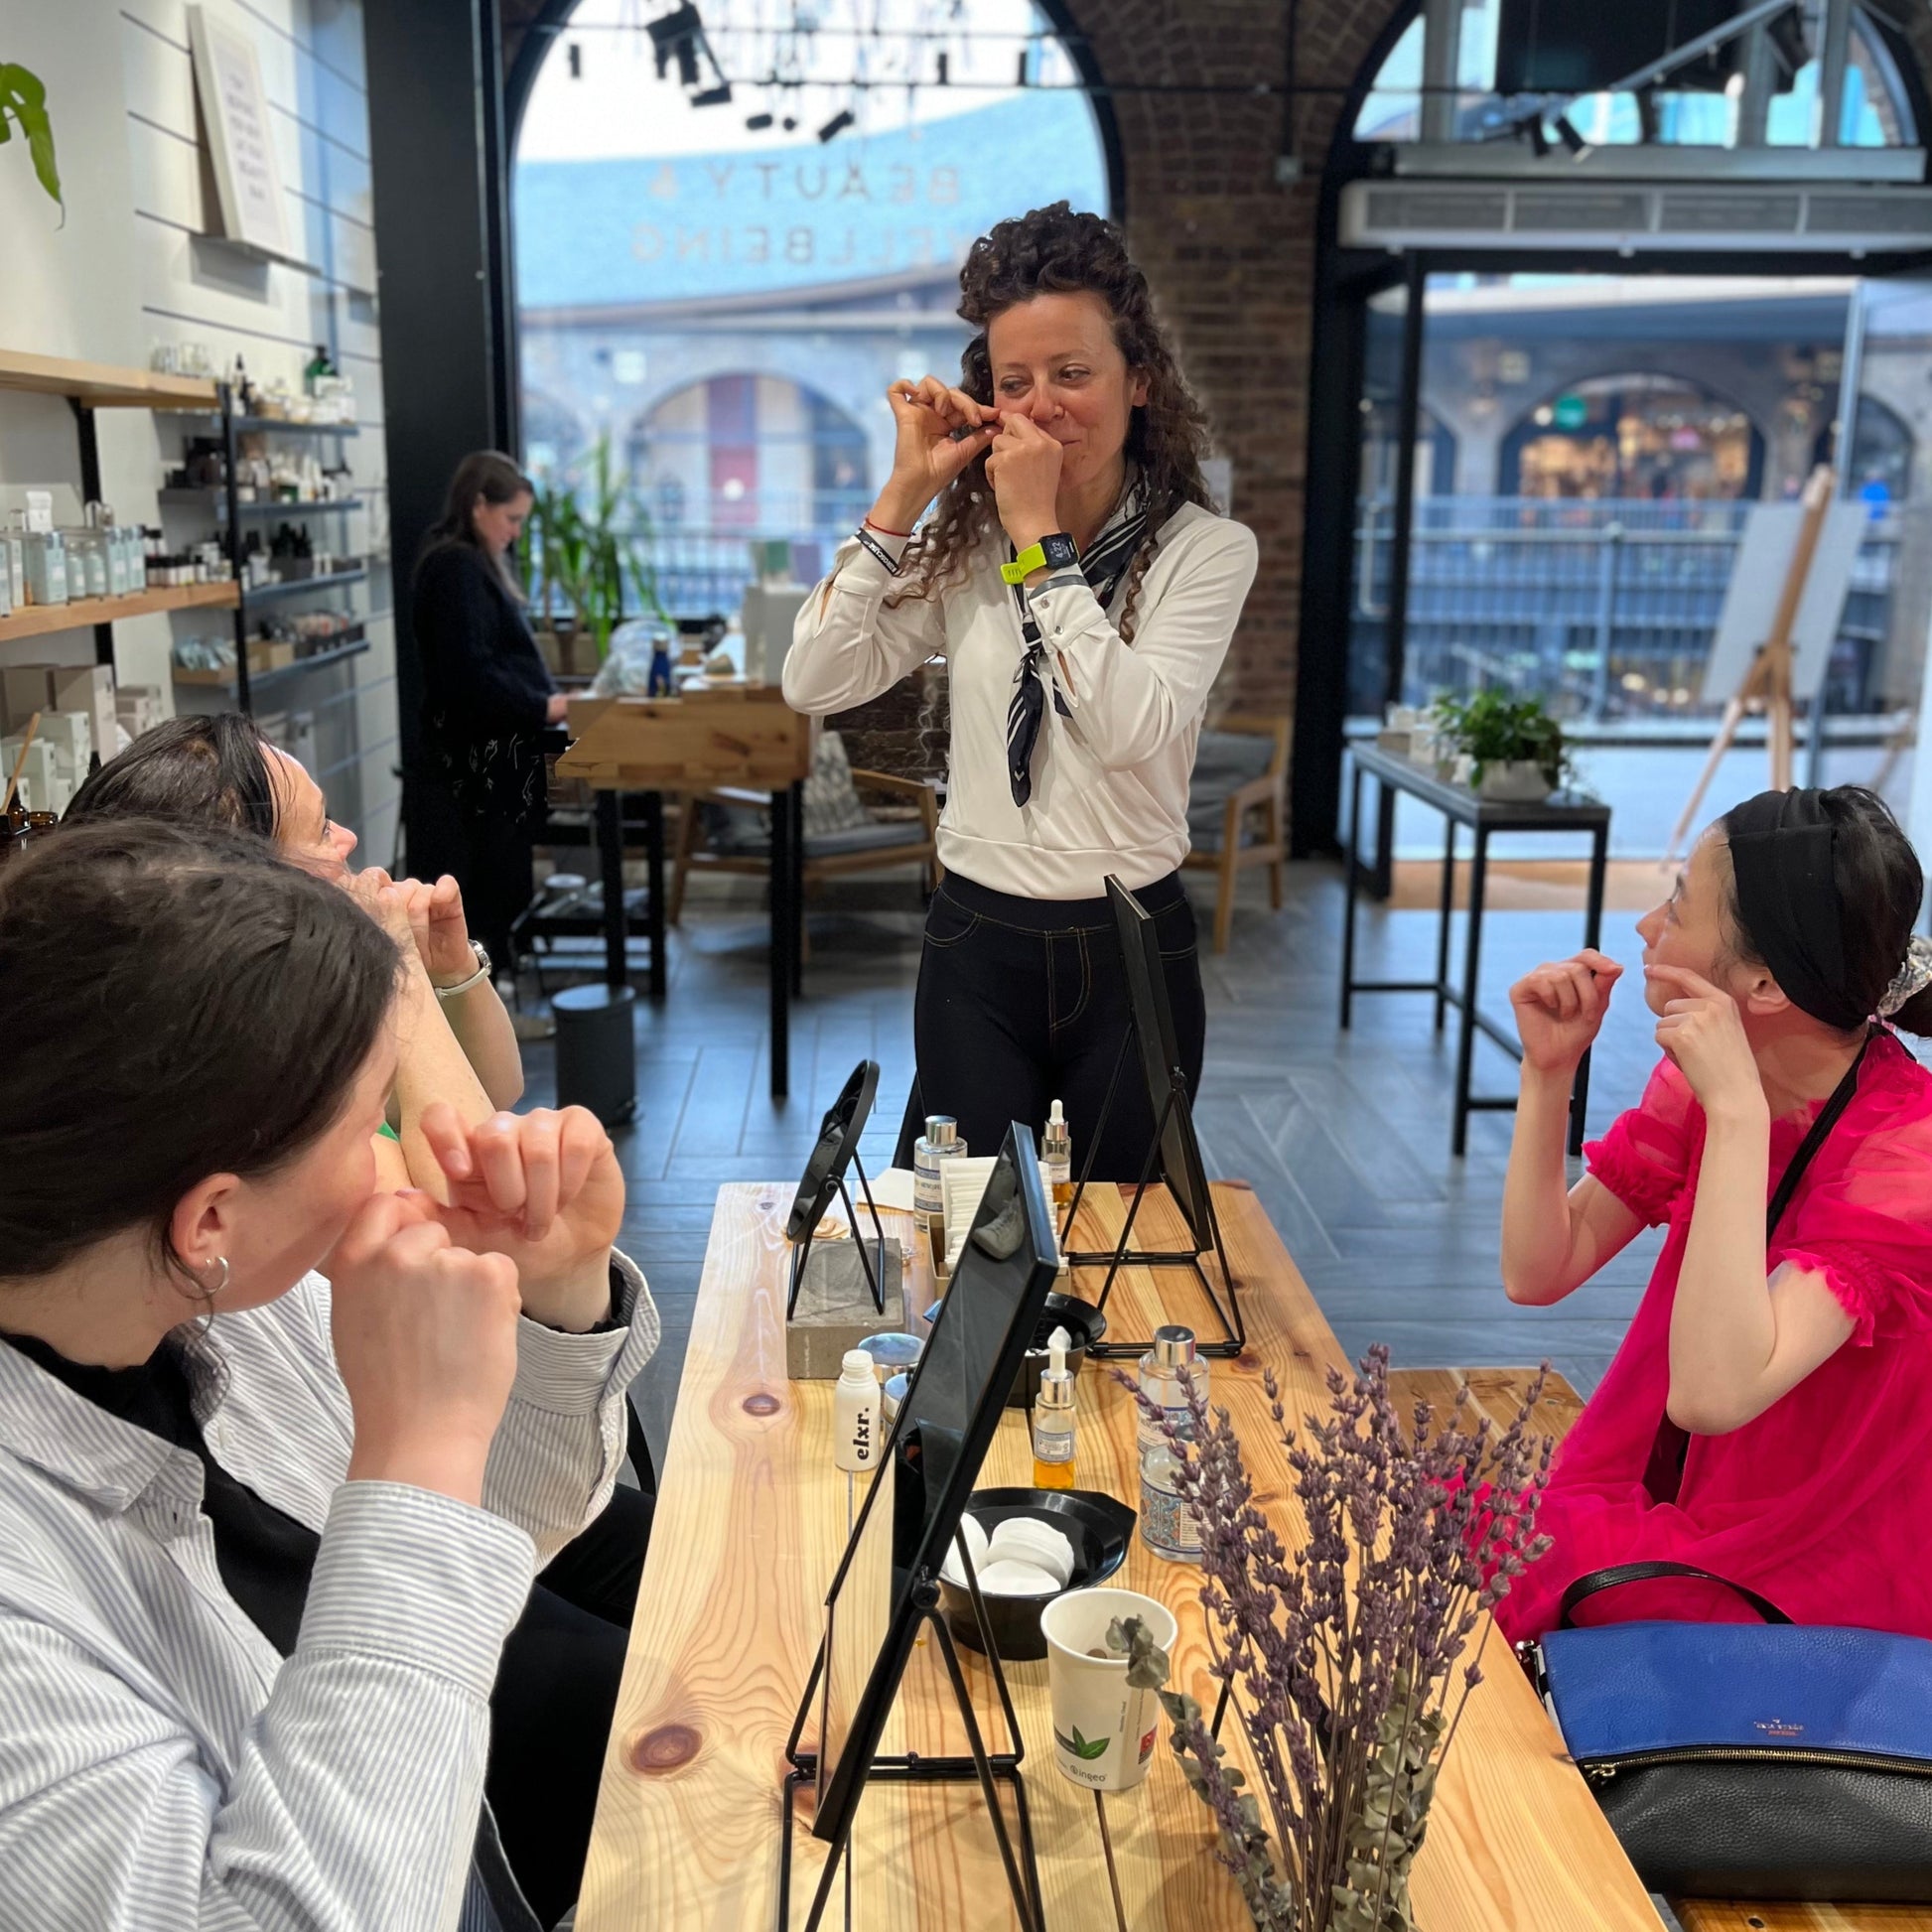 3 women sitting at a table looking towards lucia mencarelli from casa mencarelli organic skincare as she teaches them facial massage techniques they can do at home